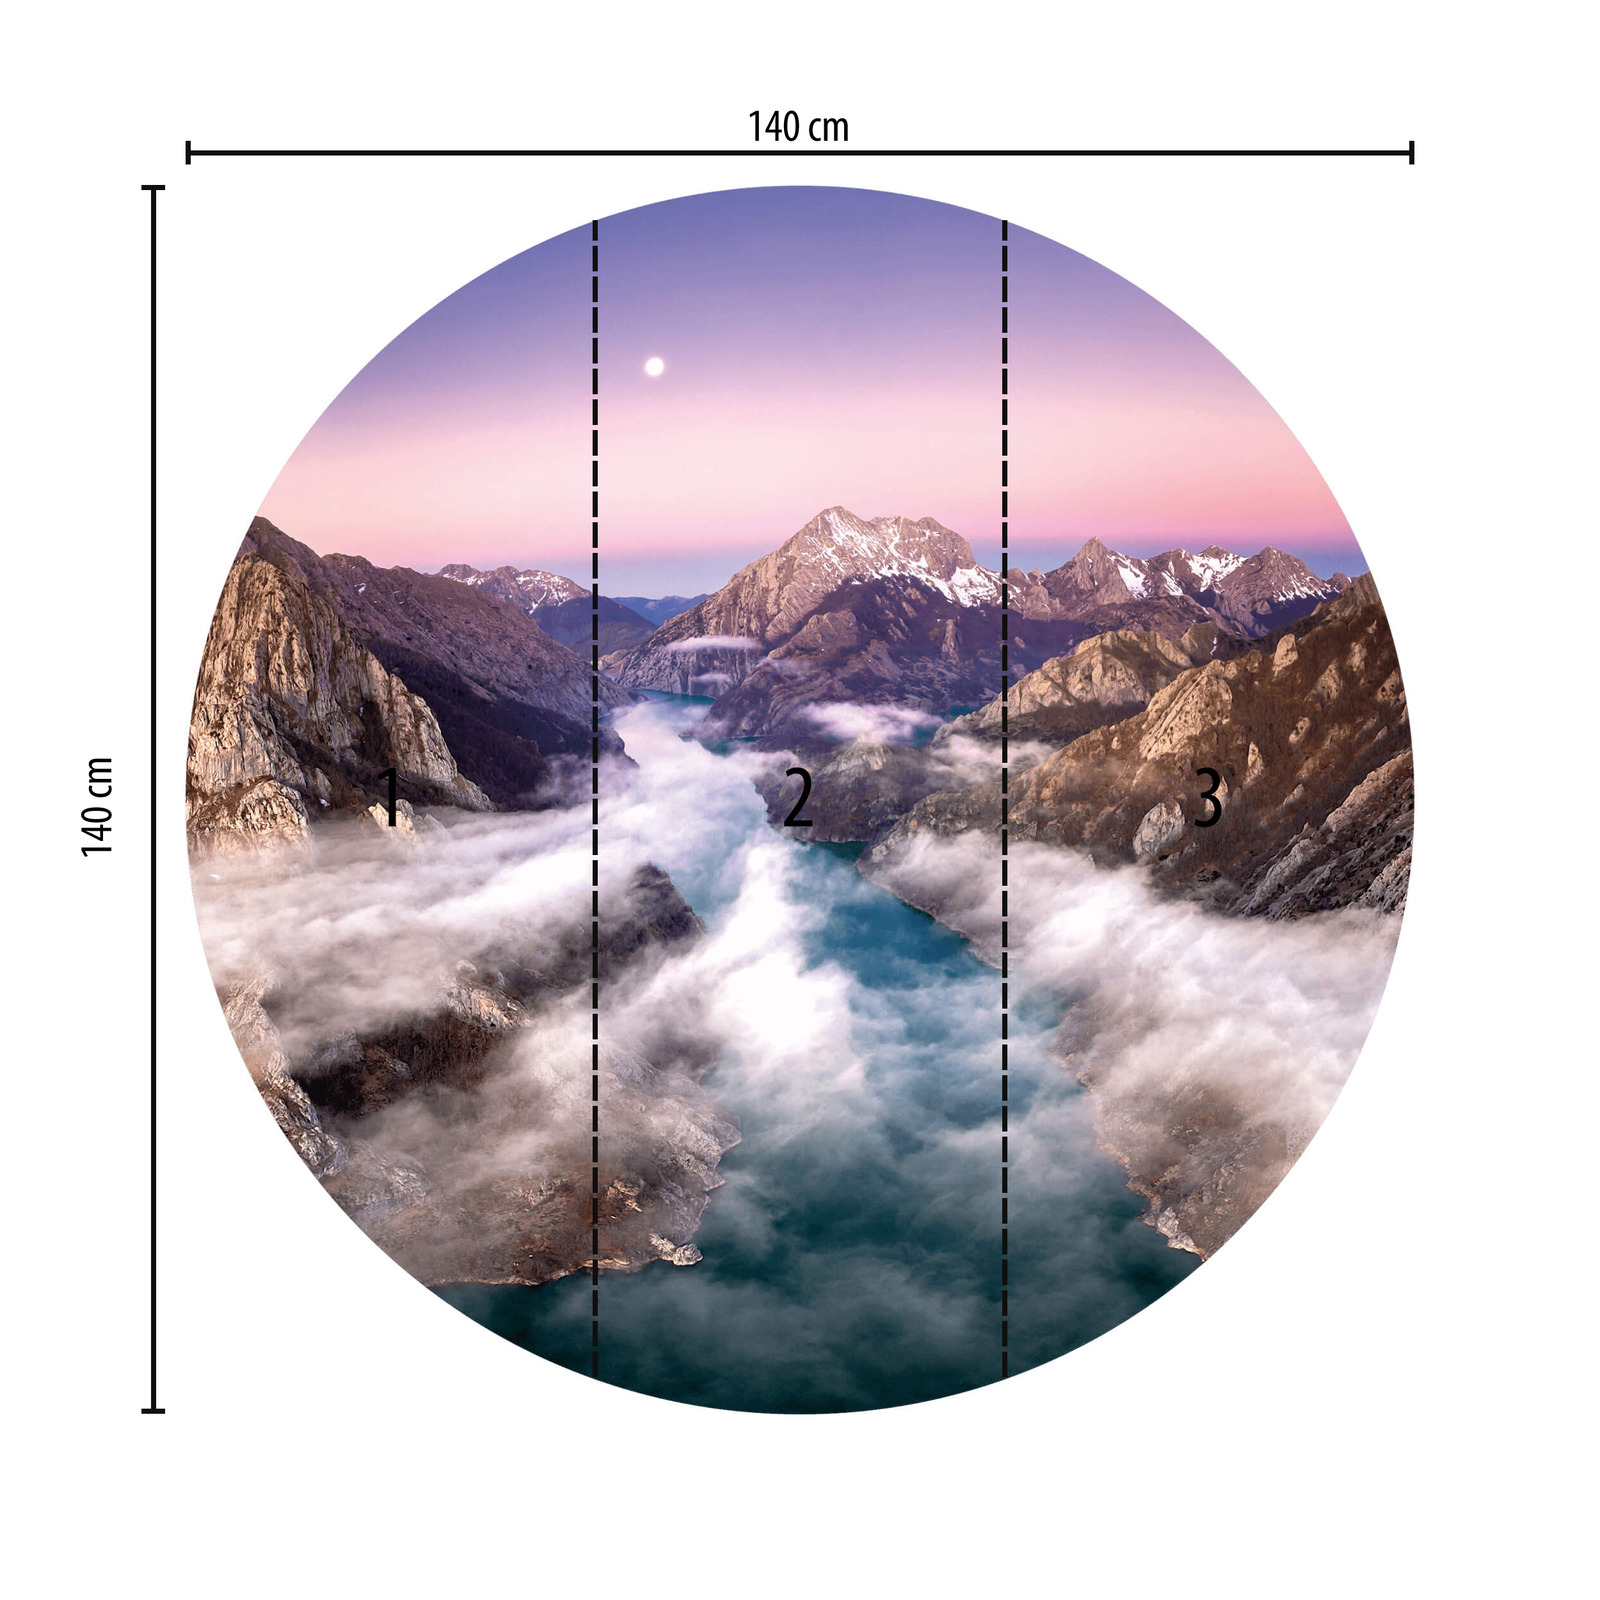             Round mural landscape in the fog
        